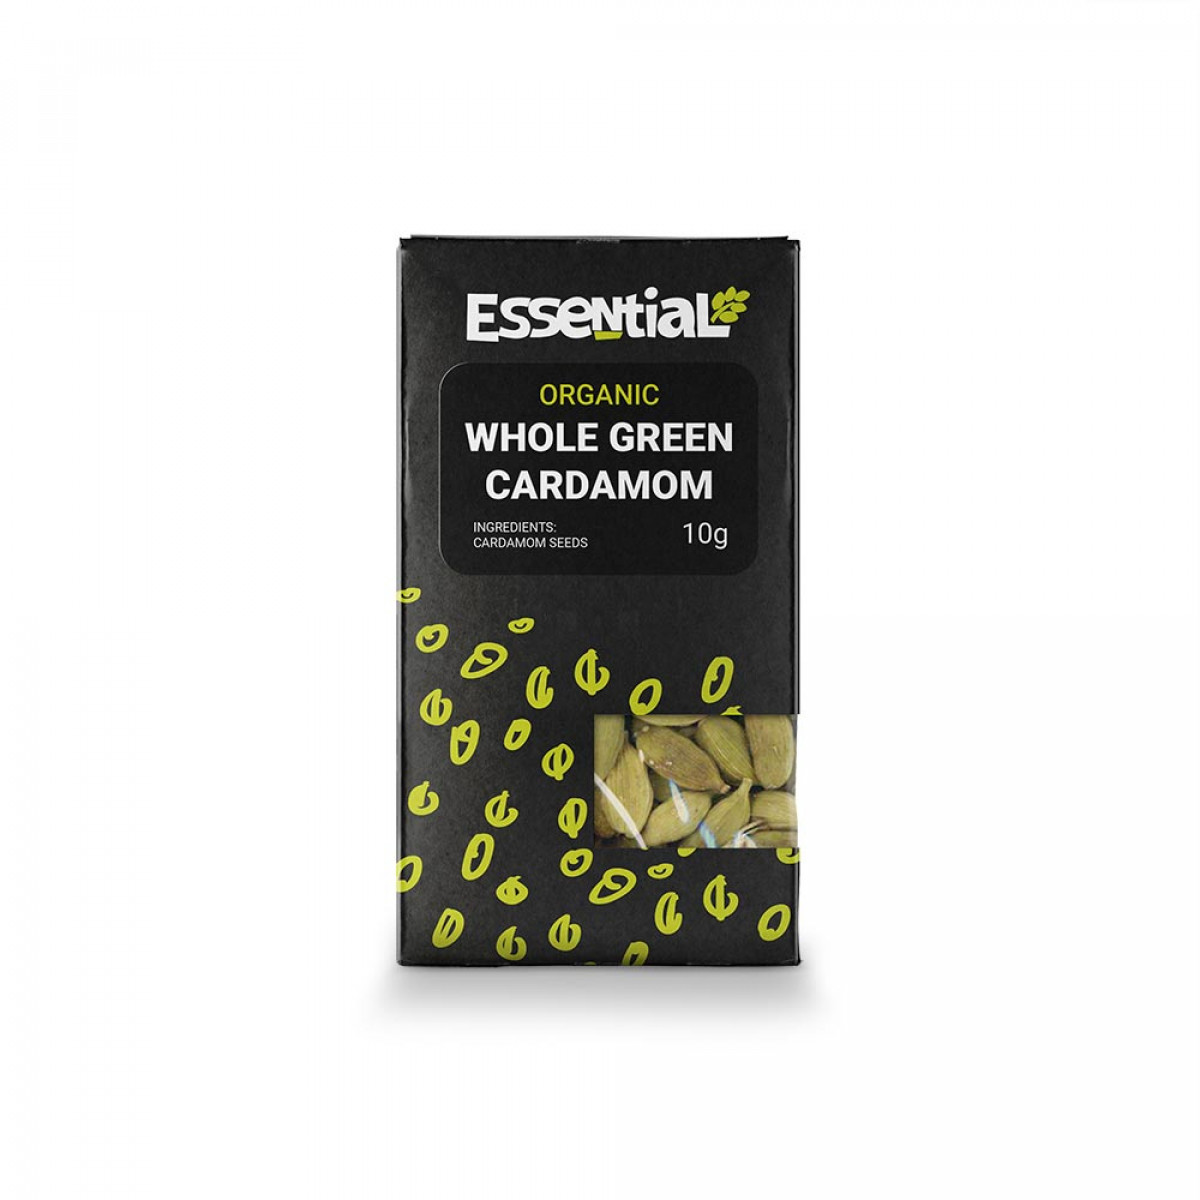 Product picture for Cardamom Whole Green